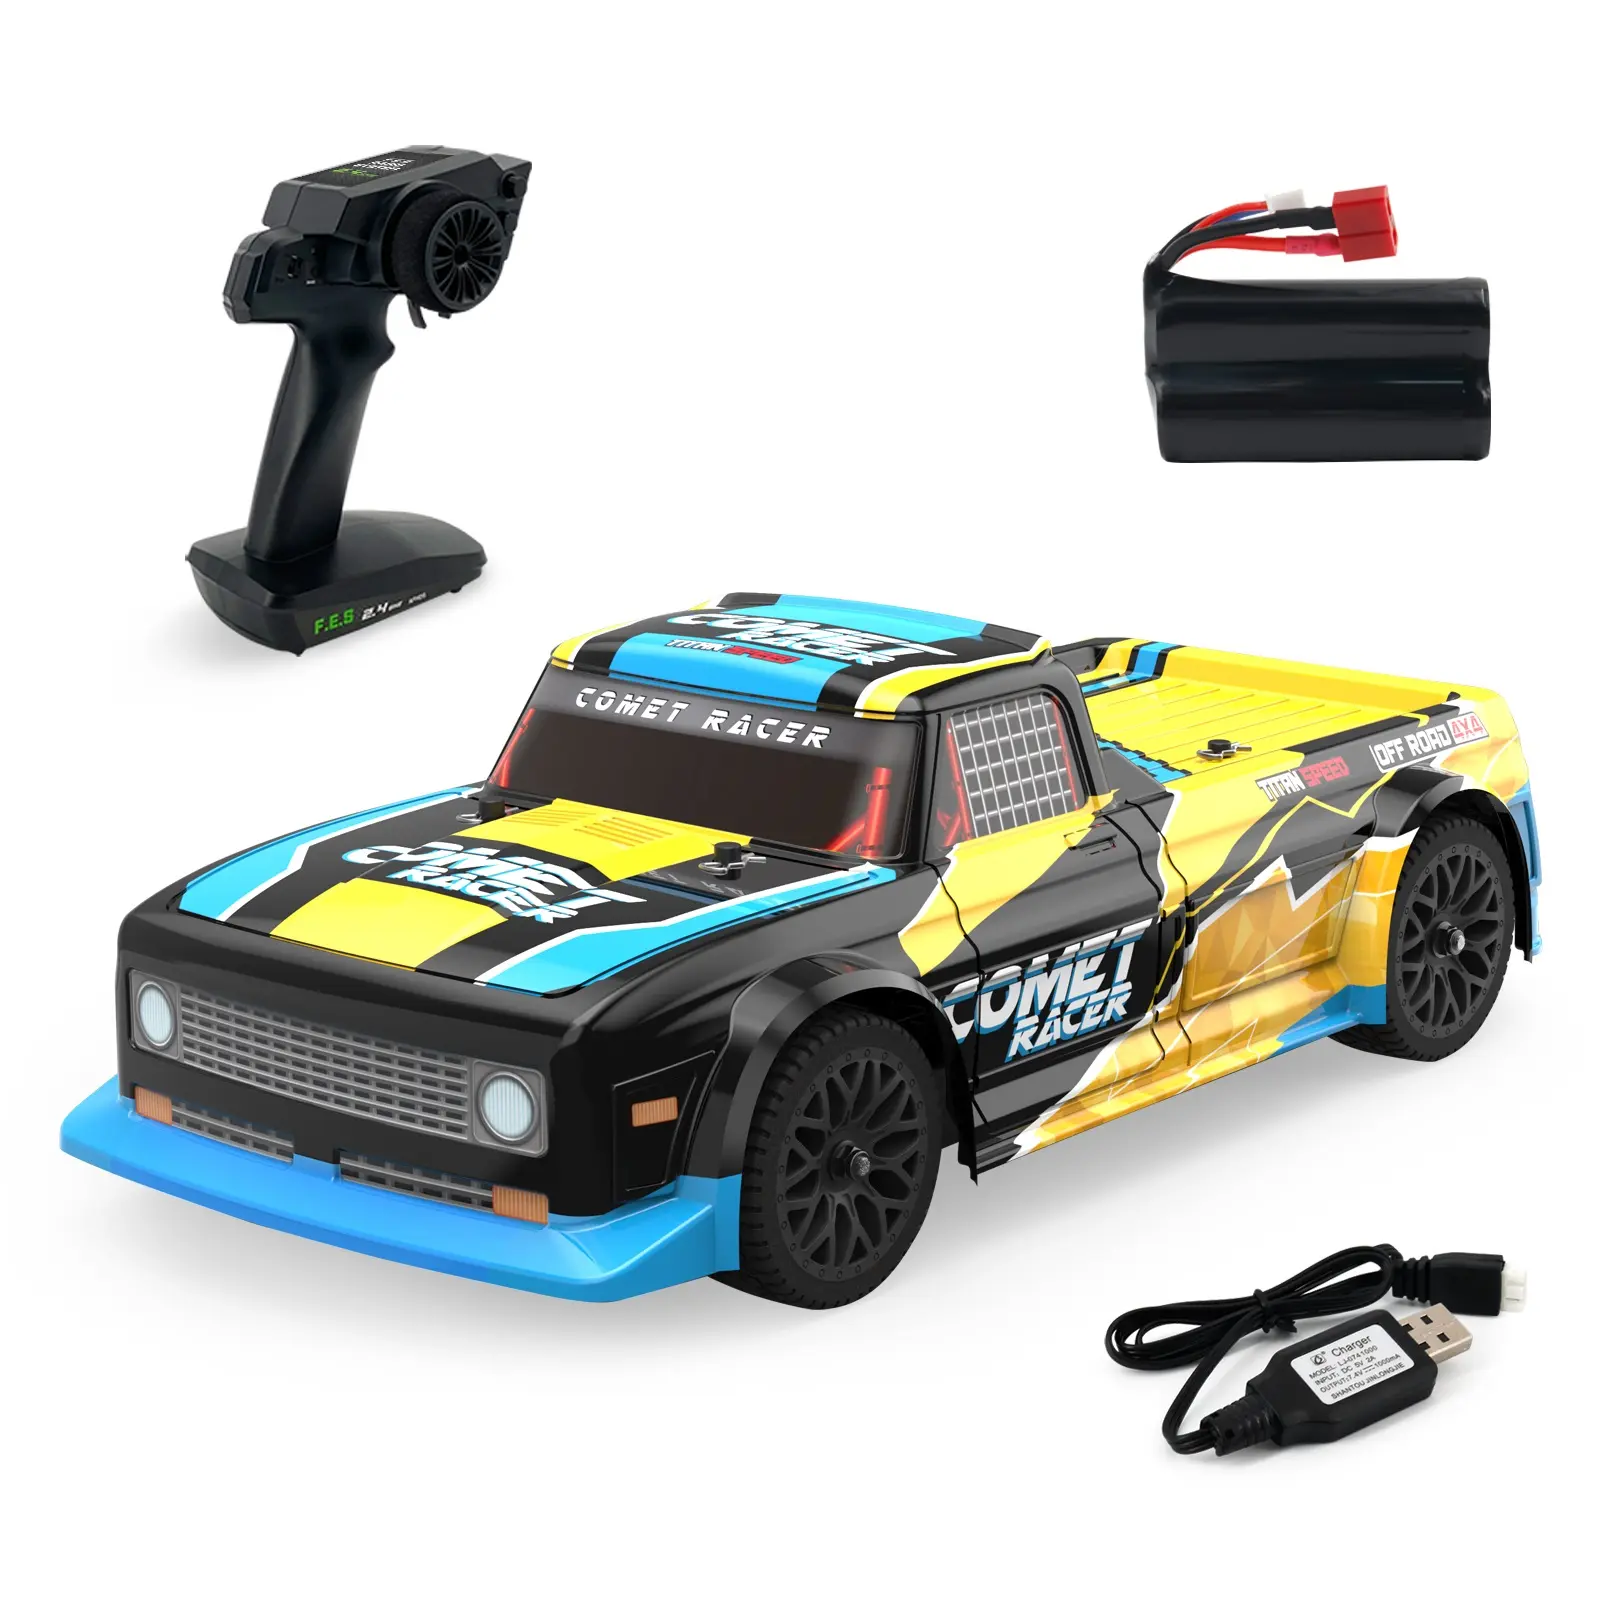 Xueren JJRC Q125 1/10 RC Monster Truck 48km/h High Speed remote control car high speed Vehicle Models Toy Amazon Hot